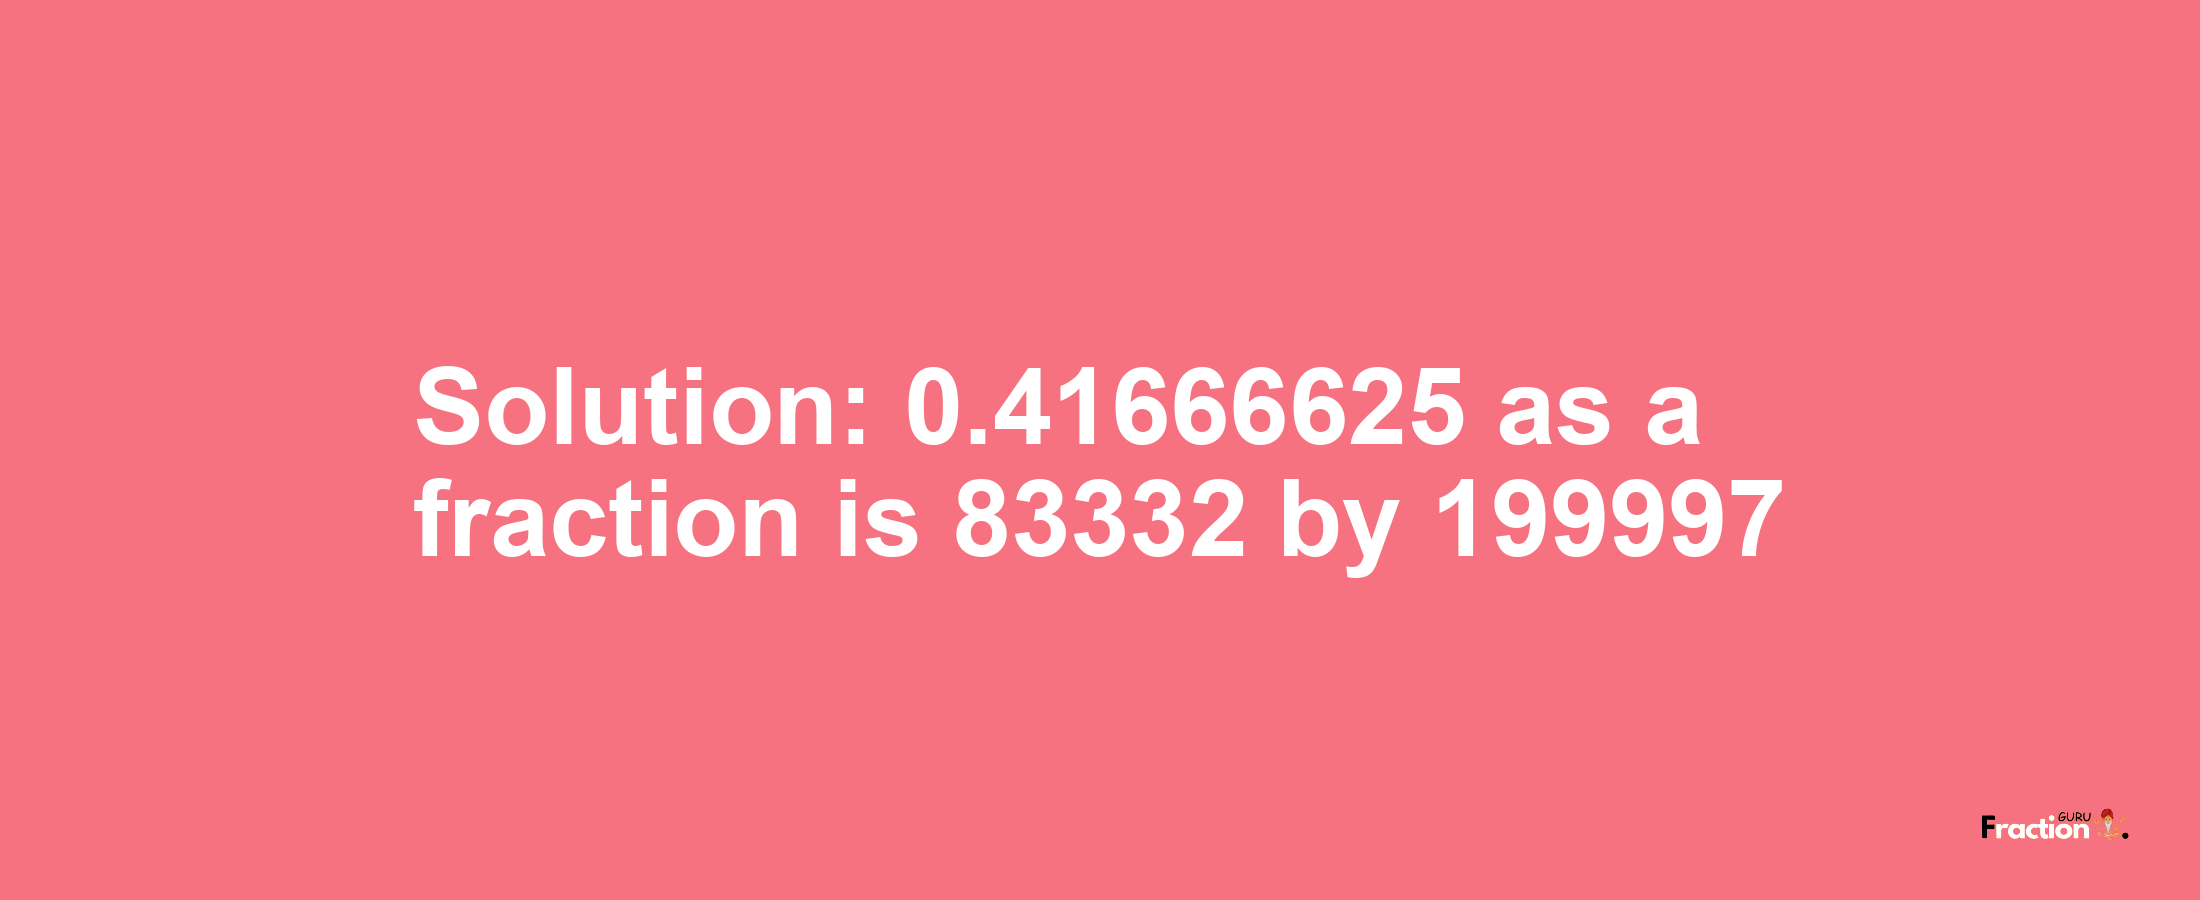 Solution:0.41666625 as a fraction is 83332/199997